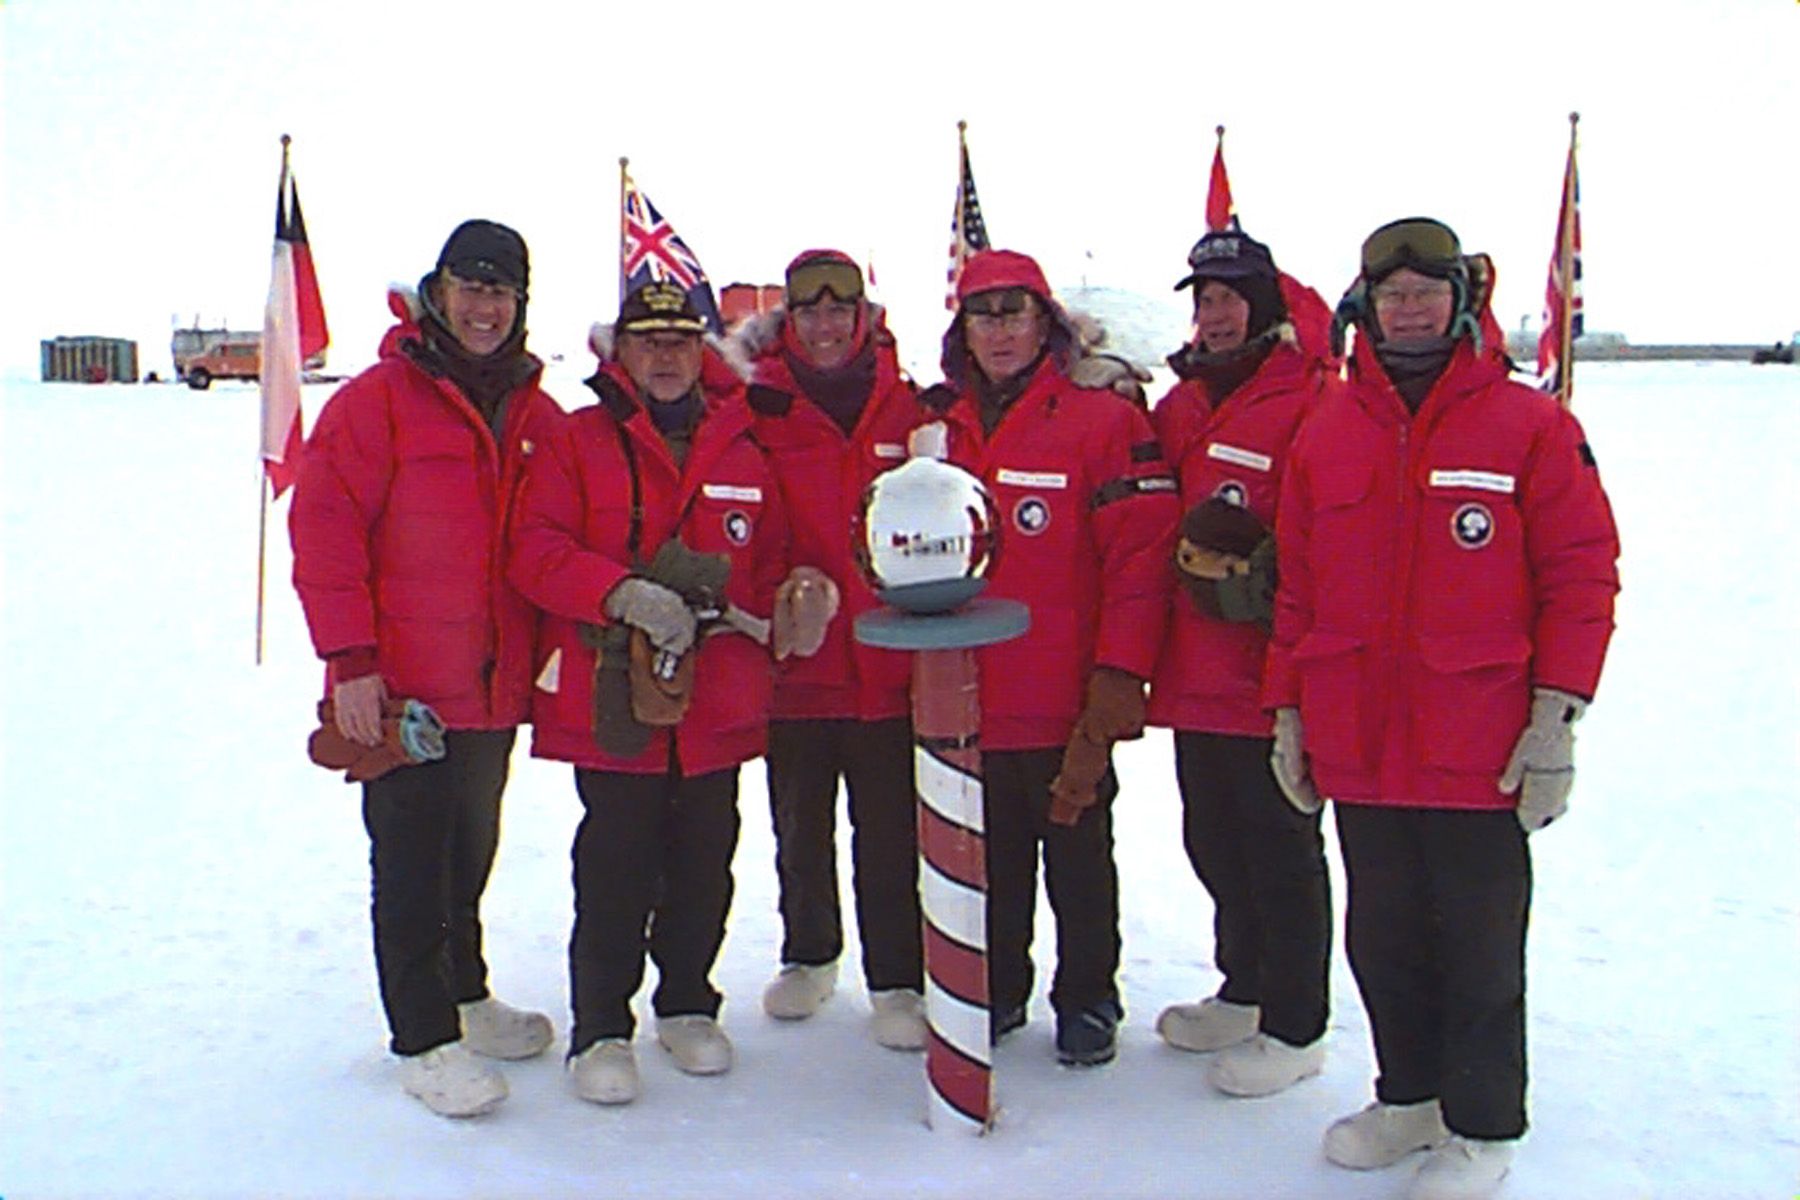 Six men in red parkas pose by a red and white striped pole.